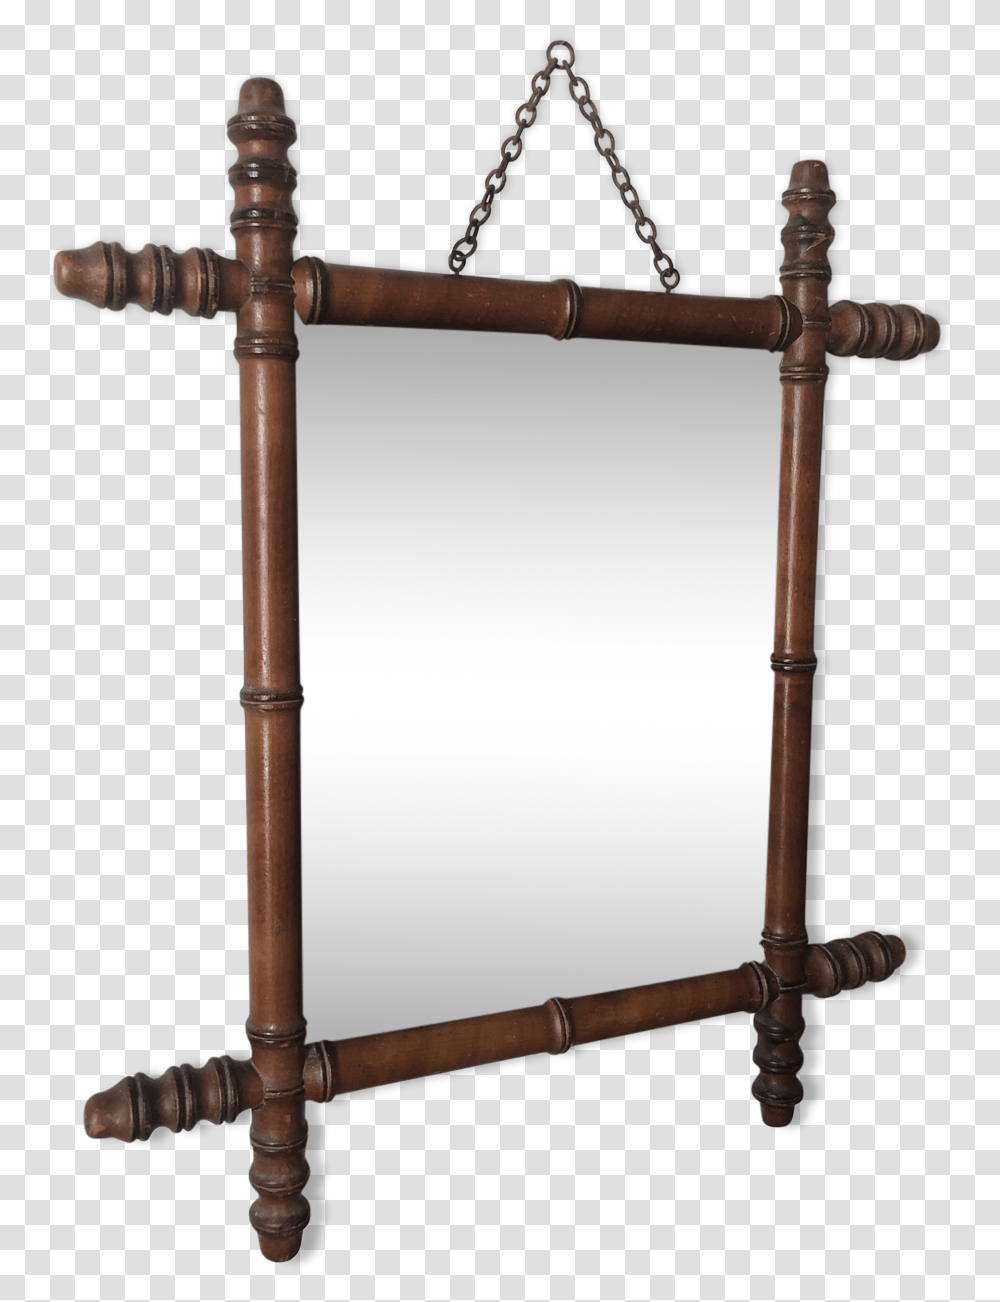 Mirror To Mercury With Bamboo Frame 24x30cm Portable Network Graphics, Sink Faucet Transparent Png